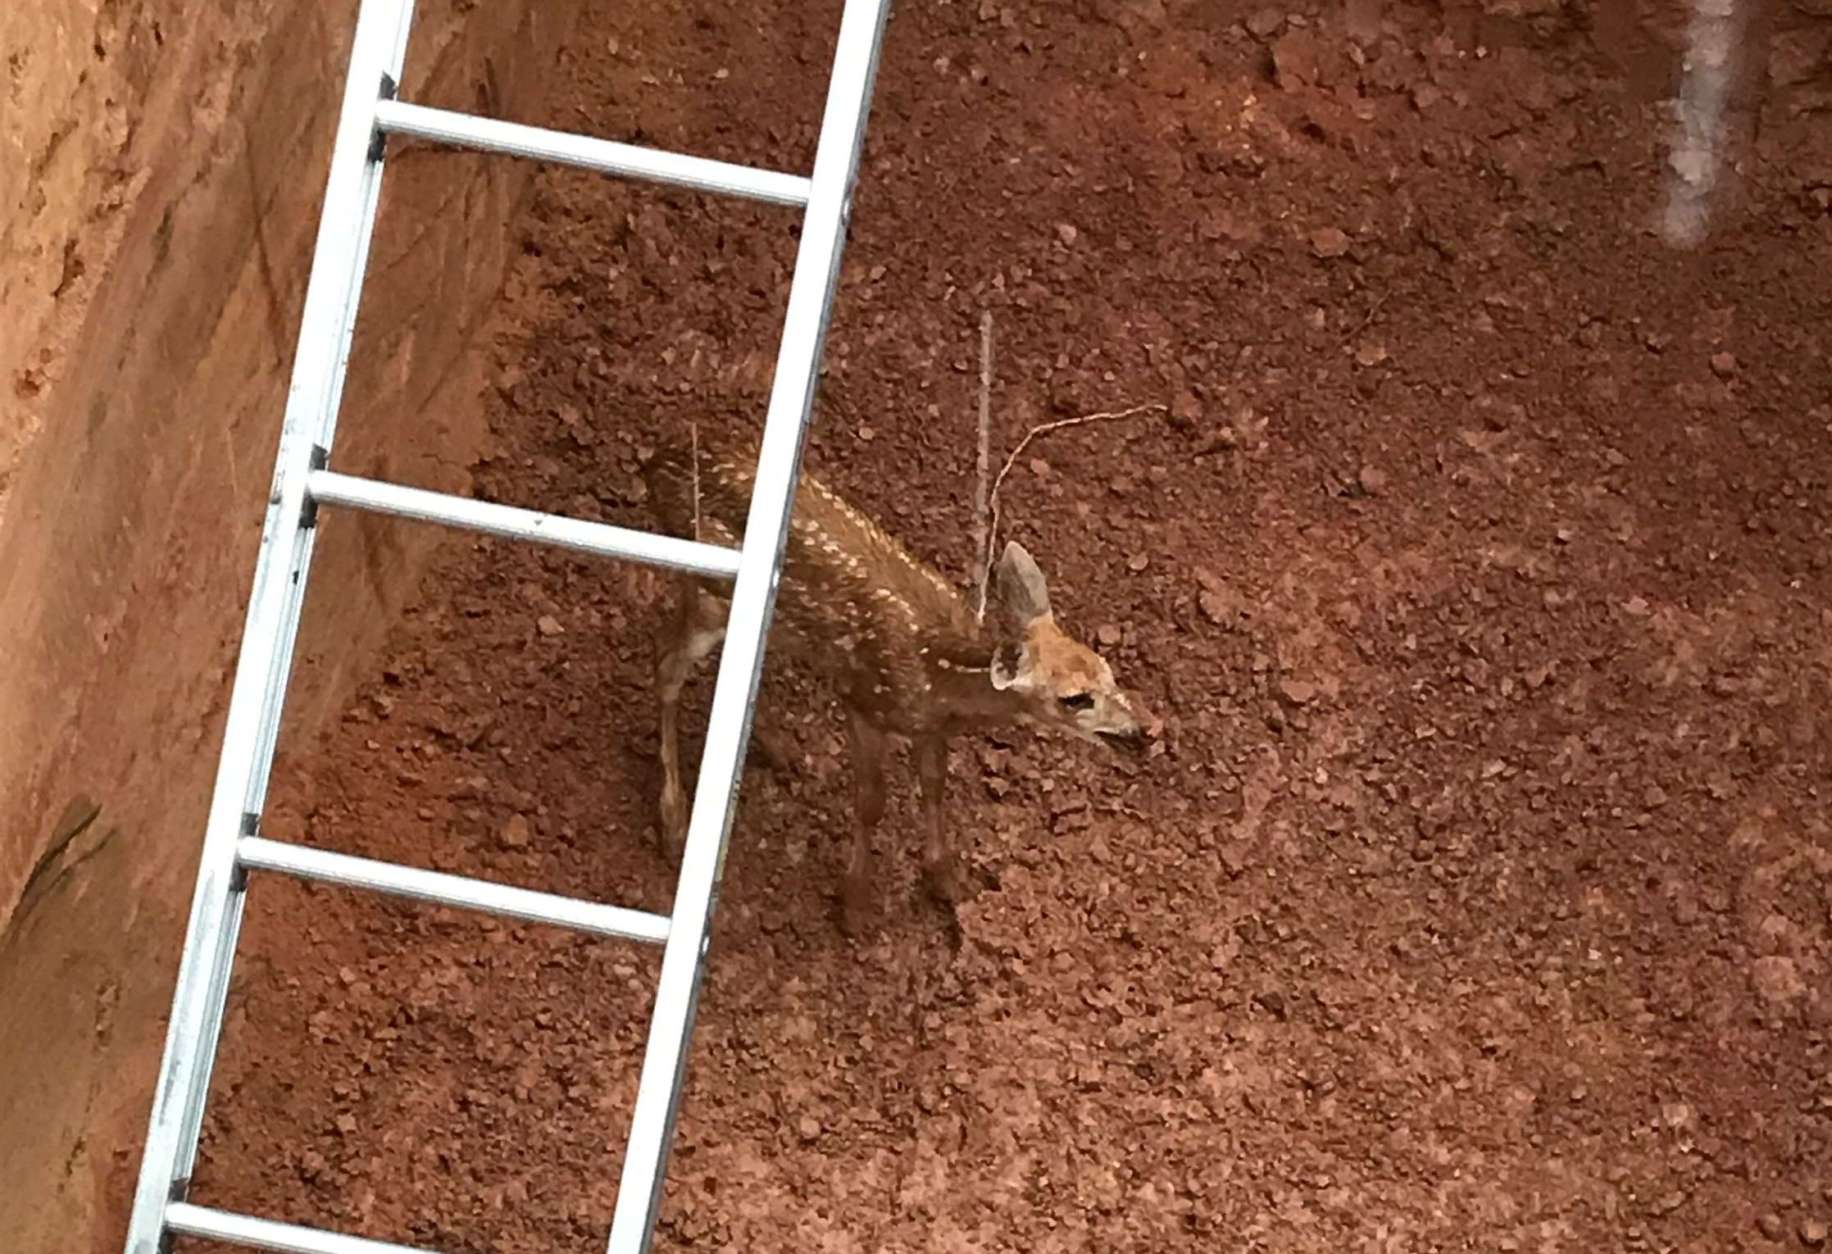 A baby deer had fallen into a hole dug for a construction project along the fence line of the National Institute of Standards and Technology in Gaithersburg. (Courtesy Montgomery County Fire & Rescue)